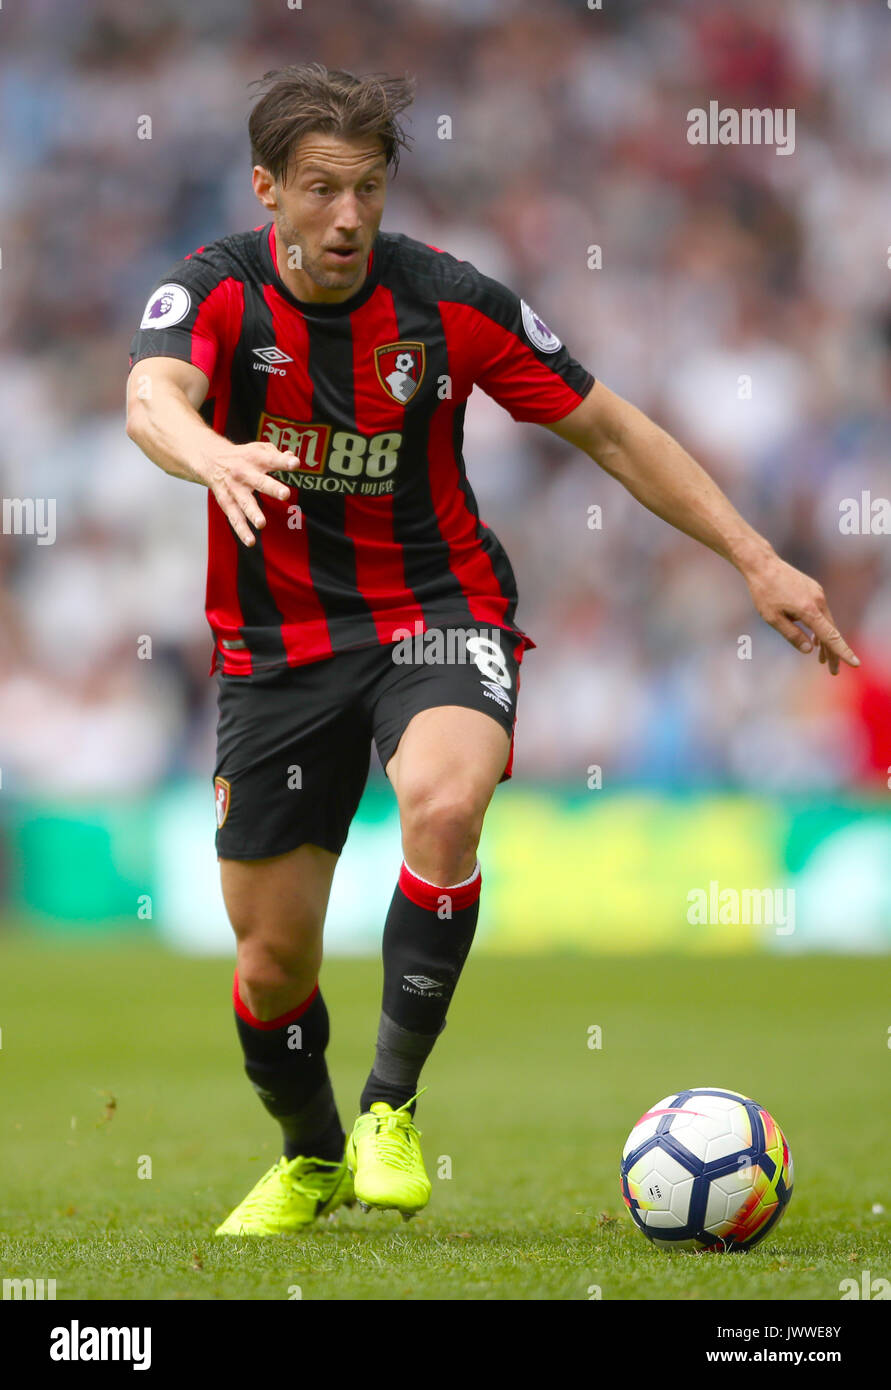 AFC Bournemouth's Harry Arter during the Premier League match at The Hawthorns, West Bromwich. PRESS ASSOCIATION Photo. Picture date: Saturday August 12, 2017. See PA story SOCCER West Brom. Photo credit should read: Nick Potts/PA Wire. RESTRICTIONS: No use with unauthorised audio, video, data, fixture lists, club/league logos or 'live' services. Online in-match use limited to 75 images, no video emulation. No use in betting, games or single club/league/player publications. Stock Photo